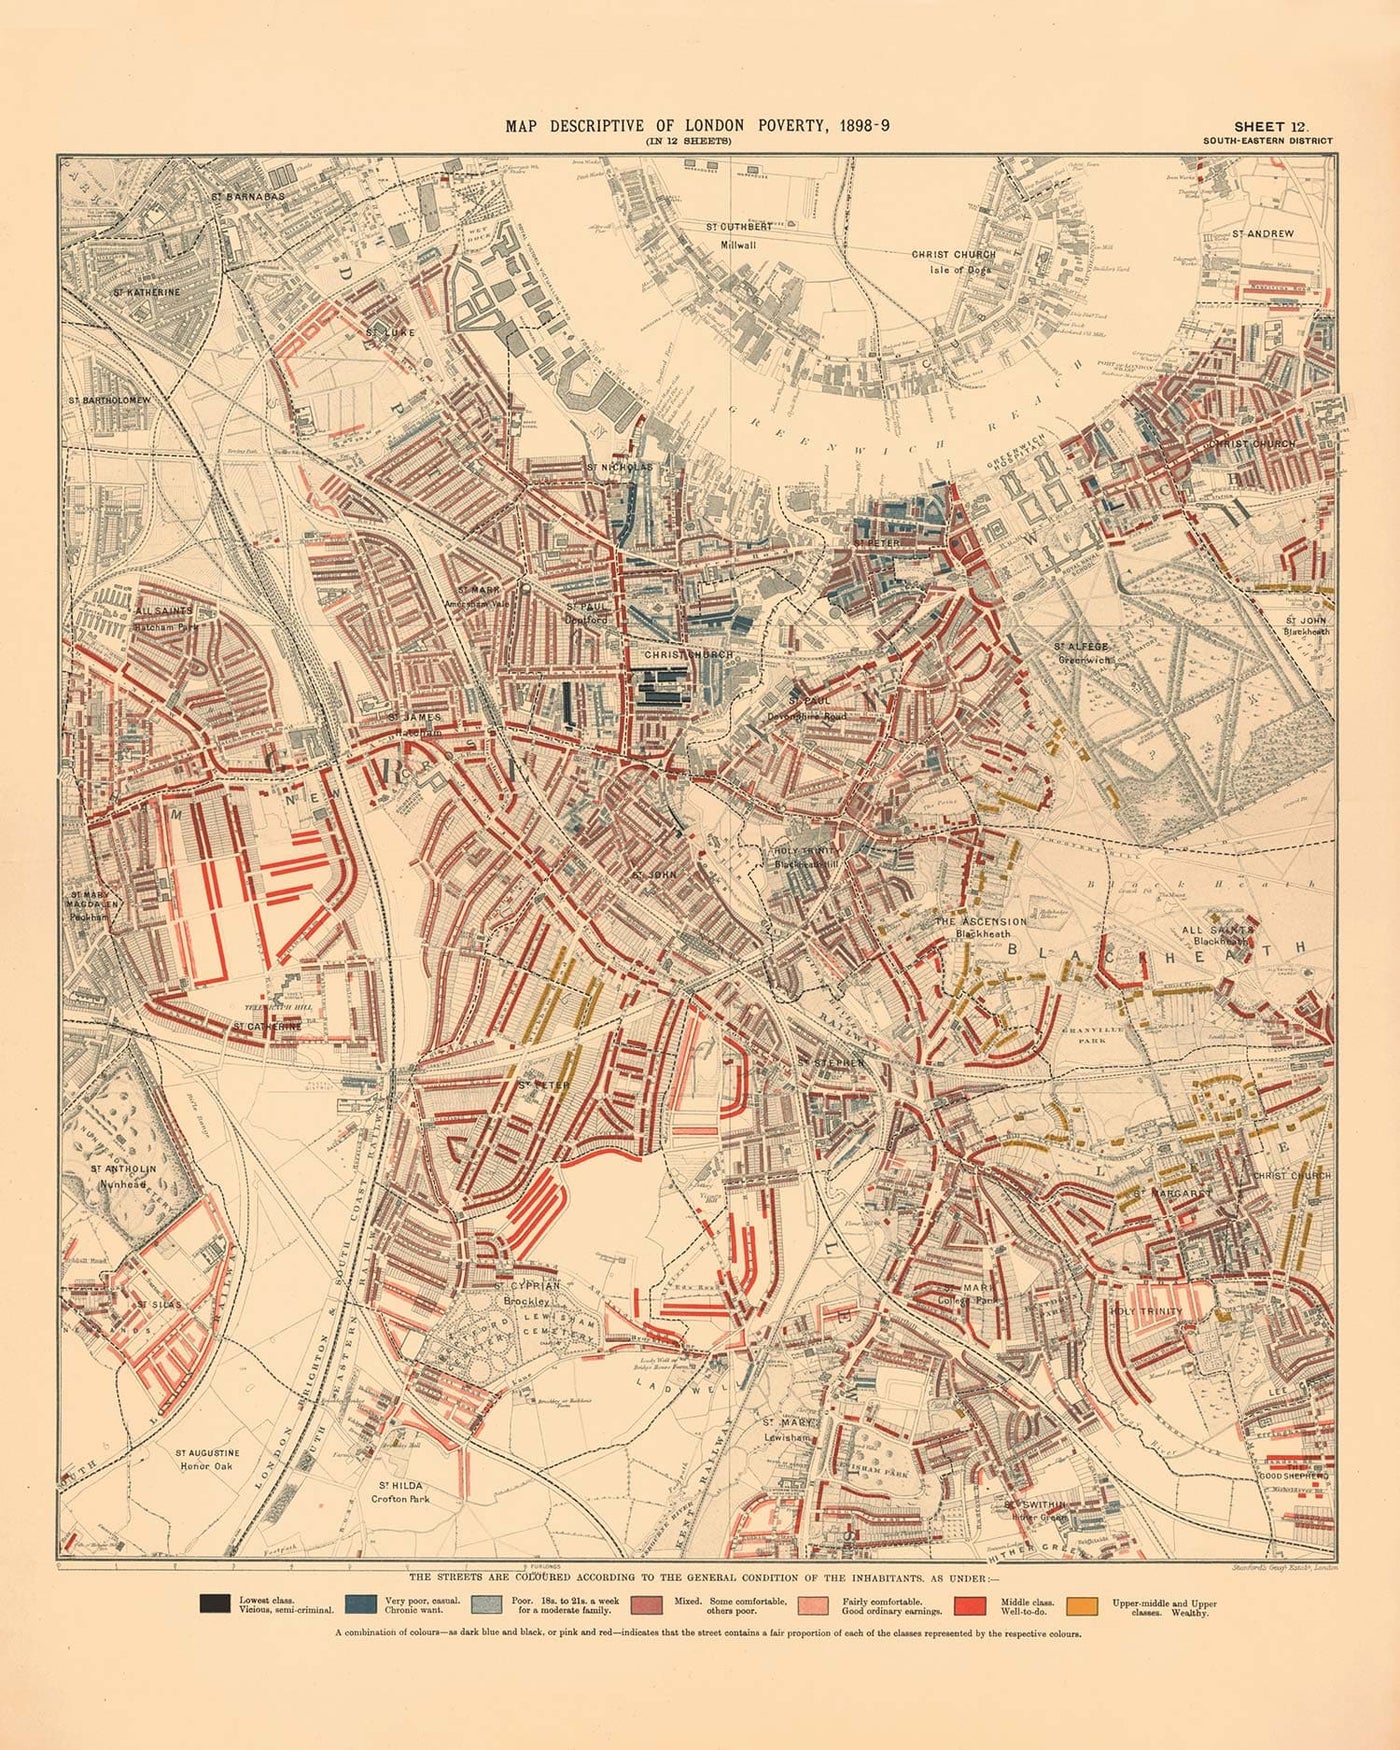 Custom Old Map of London Poverty by Charles Booth, 1898-9